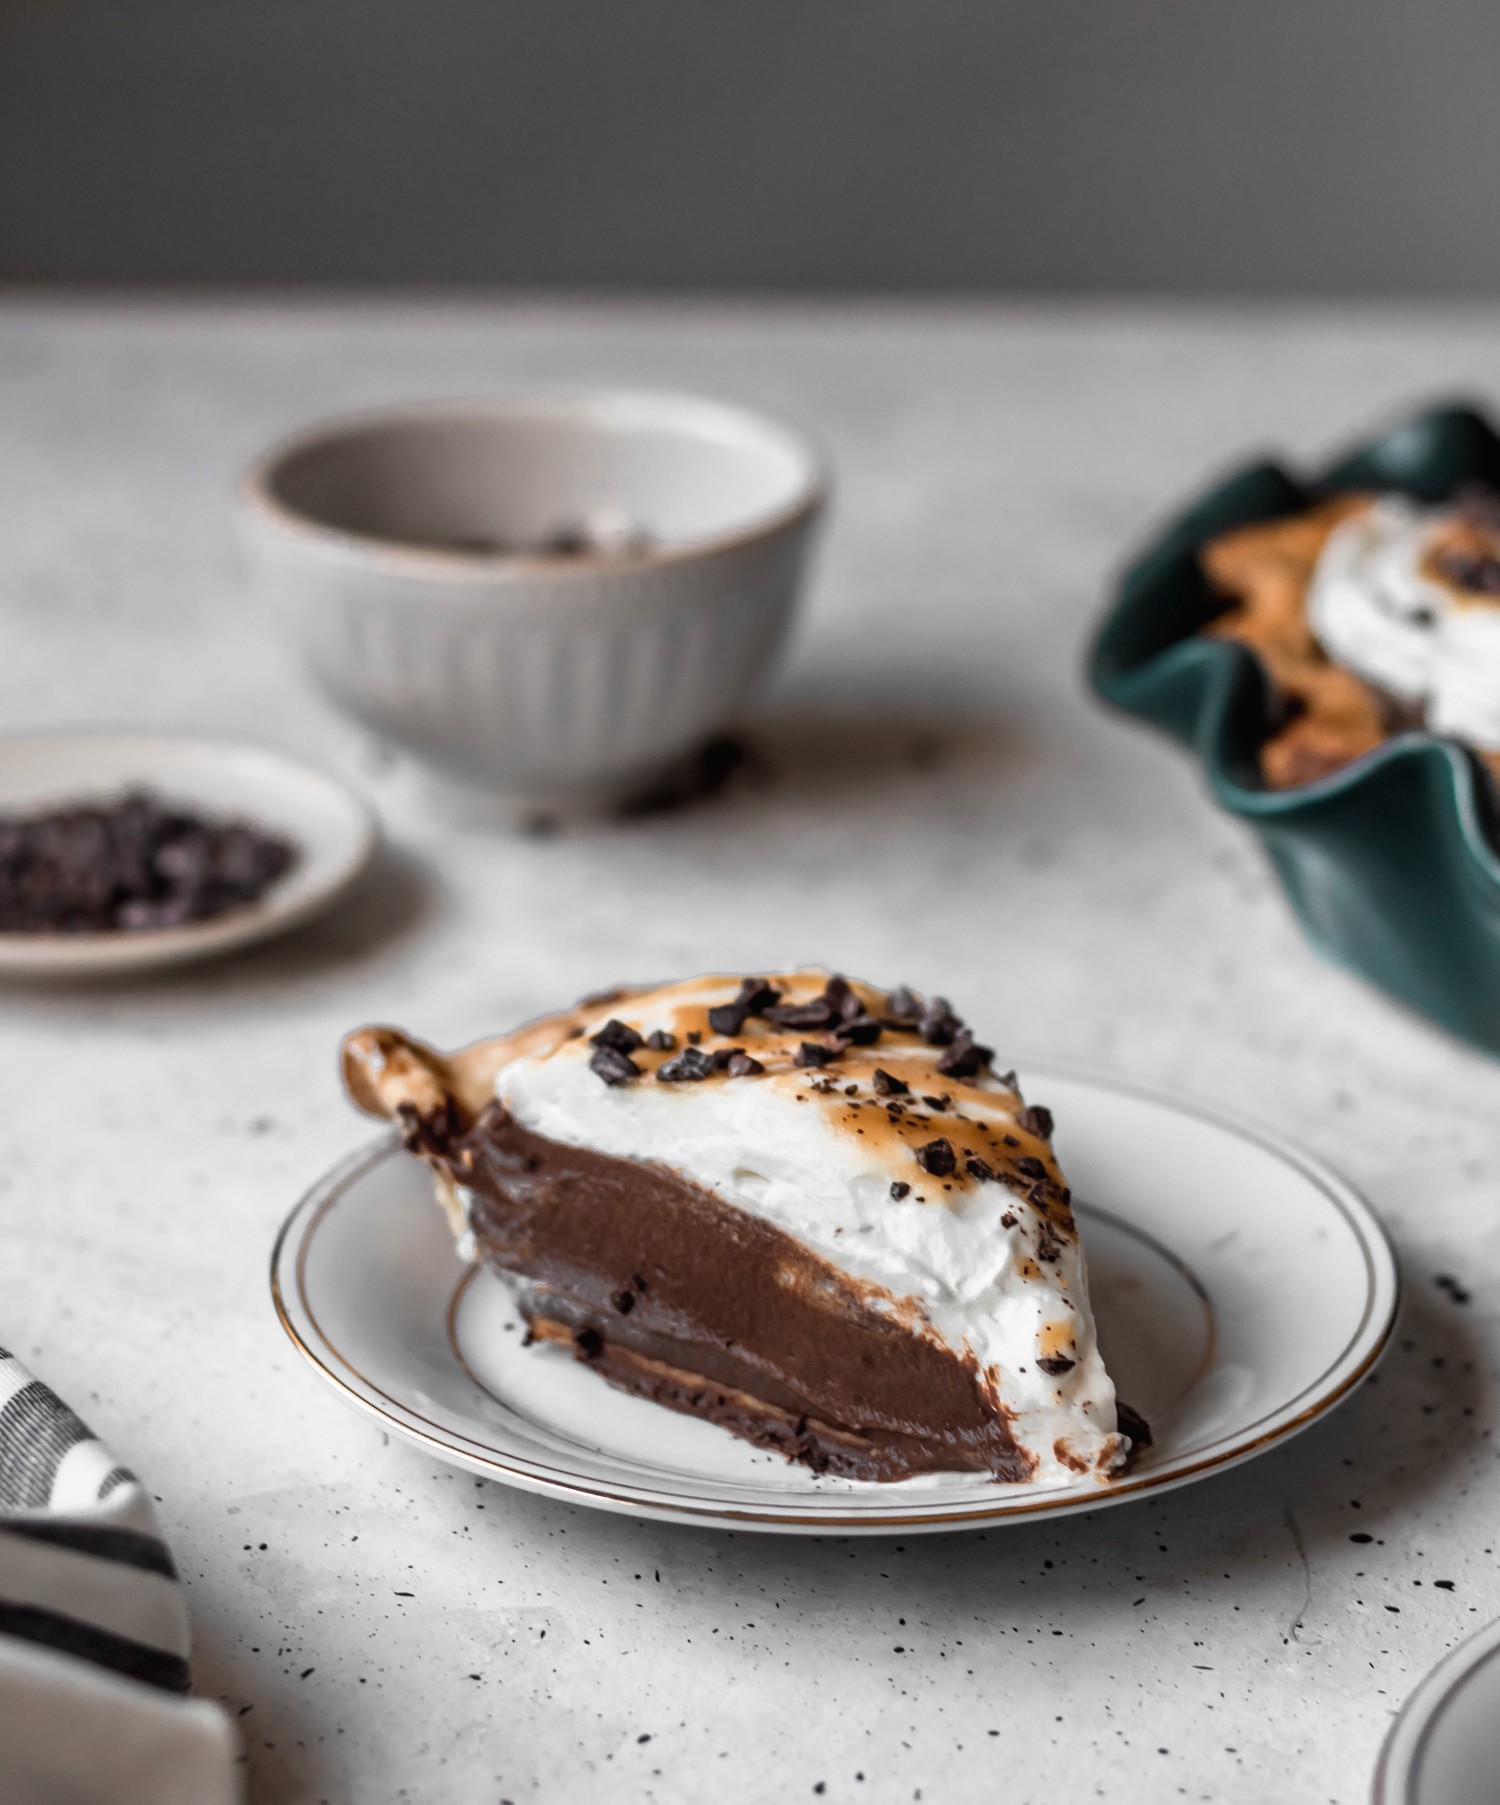 A closeup side image of a slice of chocolate cream pie on a white plate with a white bowl, teal pie plate, and striped linen in the background.